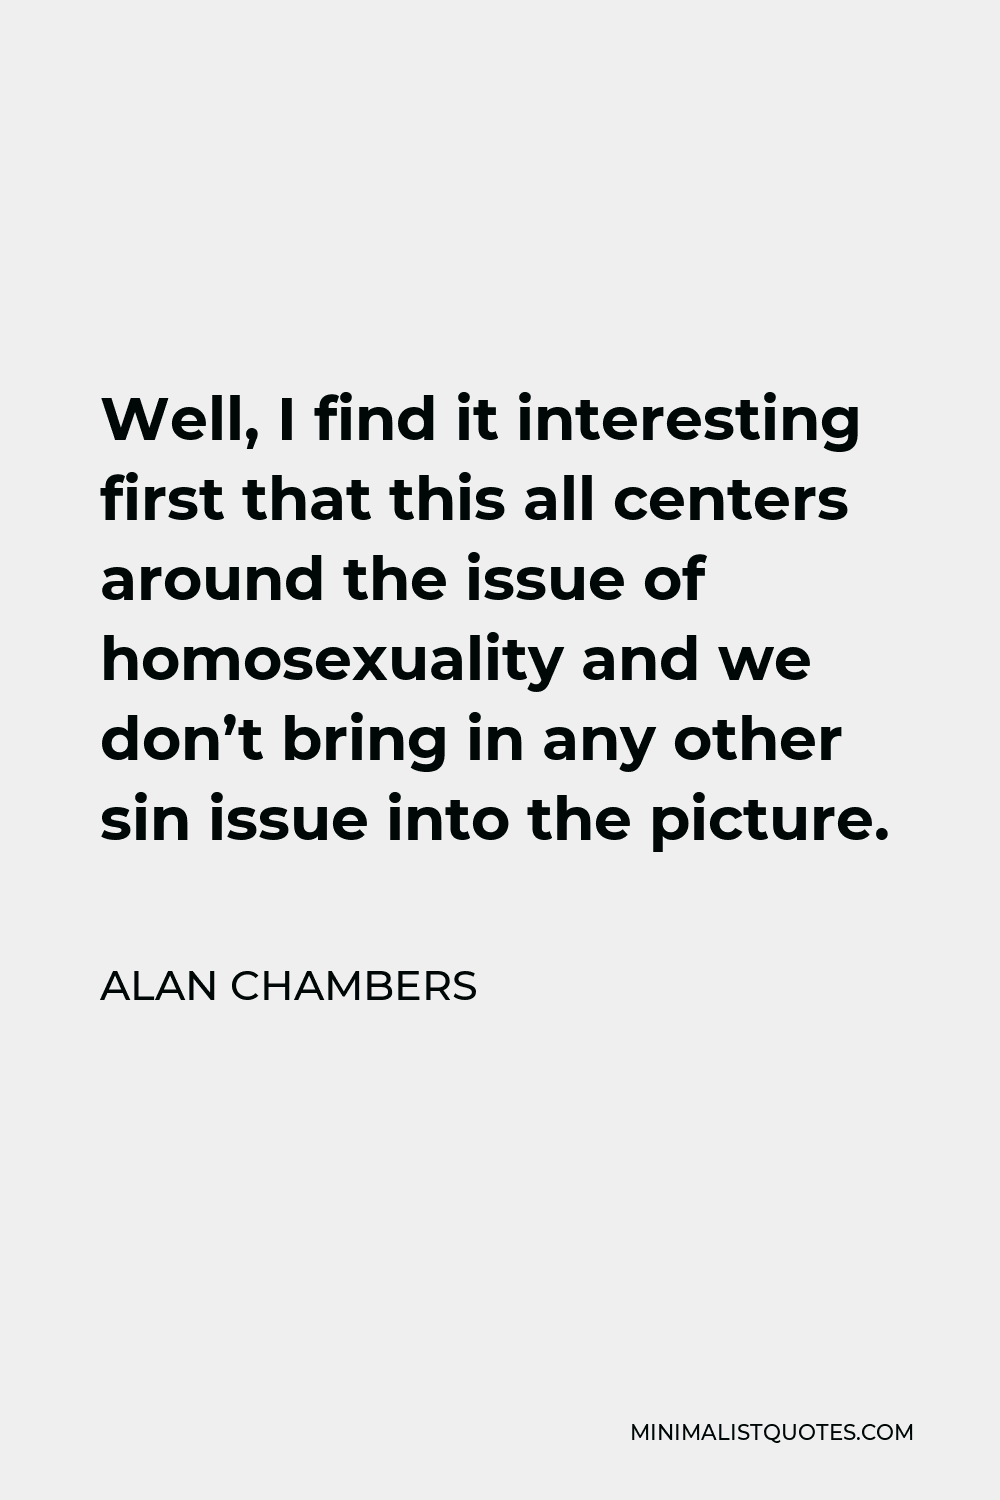 Alan Chambers Quote - Well, I find it interesting first that this all centers around the issue of homosexuality and we don’t bring in any other sin issue into the picture.